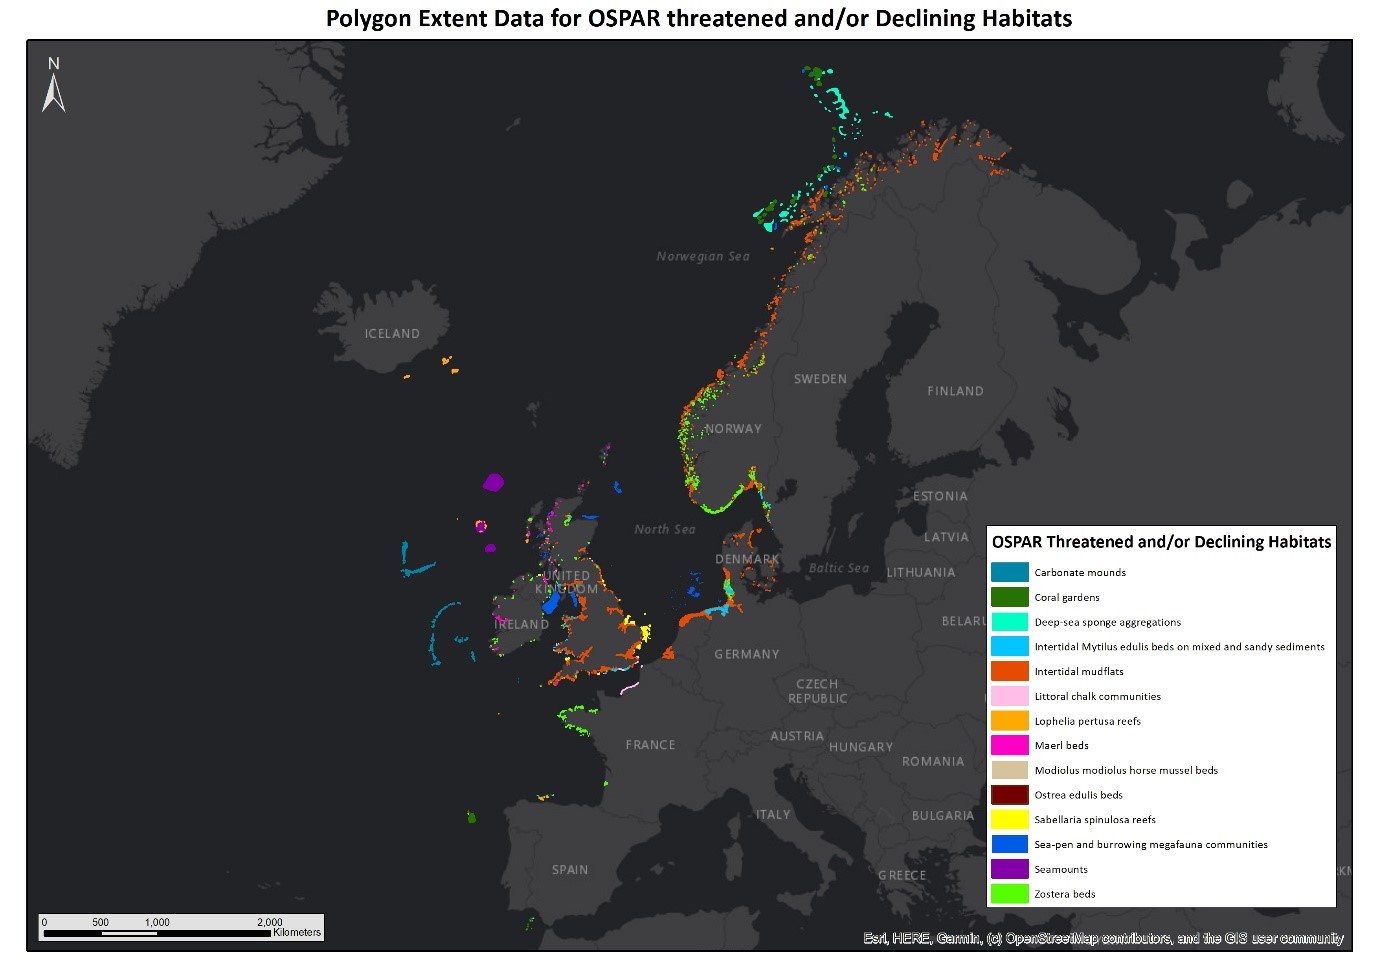 Areal extent data for OSPAR Threatened and/or Declining Habitats